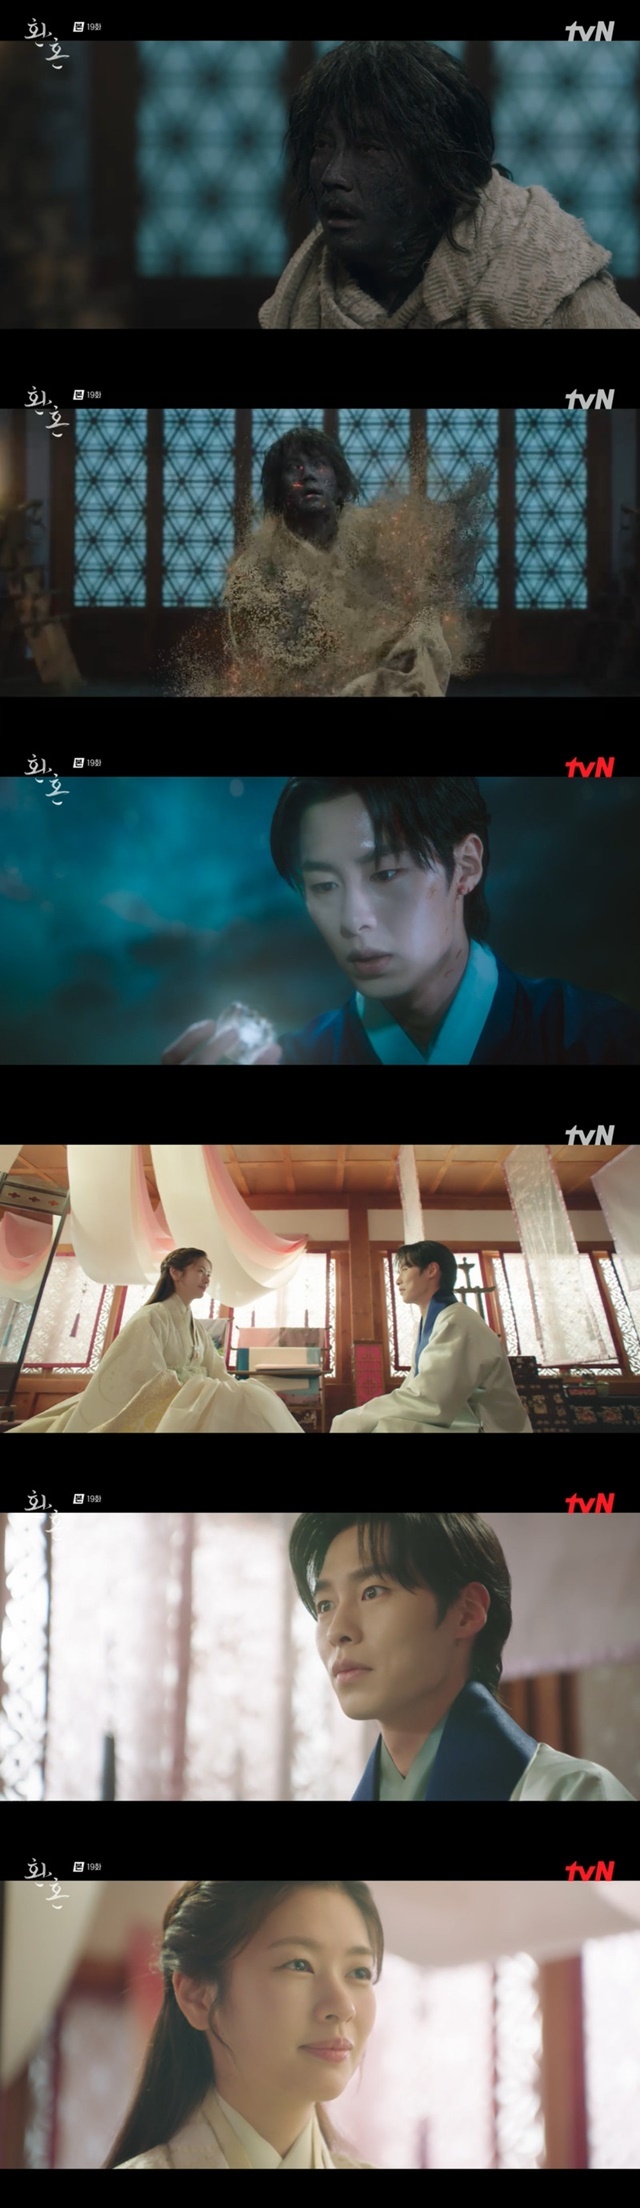 Ju Sang Wook was hit by a self-destruct blast, and Lee Jae-wook and Jung So-min lost power and got love.In the 19th episode of the TVN Saturday drama Alchemy of Souls (playplayed by Hong Jeong-eun, Hong Mi-ran/directed by Park Joon-hwa), which was broadcast on August 27, the last of Yangtze Delta (Ju Sang Book) and the proposal of his son Jang-wook and Jung So-min were drawn.Yangtze Delta returned to the unanimous meeting following the advice of Lee Seon-saeng (Lim Cheol-soo) in the situation where his sons Jang-wook and Jeong Jin-gak were trapped in the ice stones line.Yangtze Delta saved everyone by blocking the spirit of the spirit of the spirit of the spirit of the spirit of the spirit of the spirit of the spirit of the spirit of the spirit of the spirit of the queen, Seo Ha-sun (Kang Kyung-heon).Yangtze Delta said, I became an Alchemy of Souls by using the forbidden Alchemy of Souls. All the mistakes related to Songrim, Jin, and Chunbu are my own.Im the first person to take out ice stones and start to do so, and Im the one who tried to hide it. Ill be responsible for being a stone on my own.King Gosun (Choi Kwang-il) said, All sins have begun with you and I will allow you to end with death. Yangtze Delta said, See the miserable collapse of the technique.Yangtze Delta said that his son Jang-wook is in the line, He is not my son. Everyone knows that he has blocked the sting so that he can not succeed me.Do not let a child born in bad luck live as a child of a sinner. Then Yangtze Delta self-destructed and disappeared, and with him, the ice stones became raining and the people trapped in the line saved their lives.Jang Wook and Jung So-min lost their strength but saved their lives. Jang Wook denied his existence until the end of Yangtze Delta, so he did not inherit his fathers price.Park Jin (Yoo Jun-sang) and Kim Do-ju (Onara) opened the box left by Yangtze Delta and confirmed that Jang Wook was the son of King Goseong (Park Byung-eun) Yangtze Delta and Alchemy of Souls, but decided to hide the fact until the end.Jangwook and Mudeok lost their power but got love. Jangwook told Mudeok, Lean on Me, my disciple today.I thanked you for putting the ugly student on the edge of the cliff and pushing him to this place.Lean on Me gave up his chance to find strength and his disciples lost their energy, but he got a precious person to be with for a lifetime. Please allow the excommunication. 